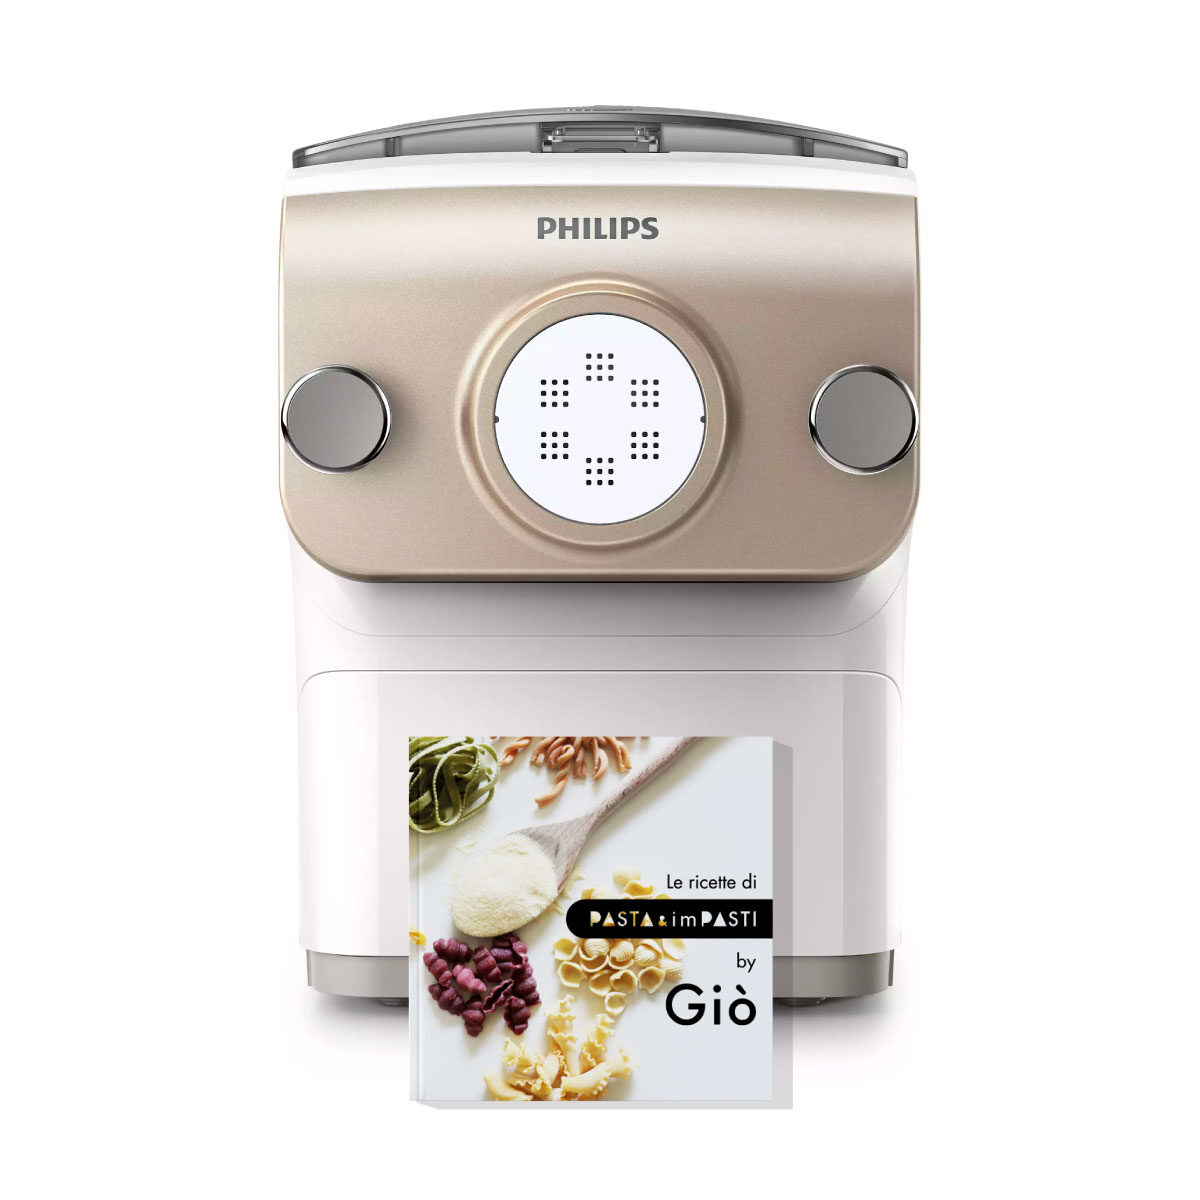 Starter Kit N° 1003 per Philips Pastamaker Avance Collection - CAPO12 -  Trafile e Pasta 100% MADE IN ITALY